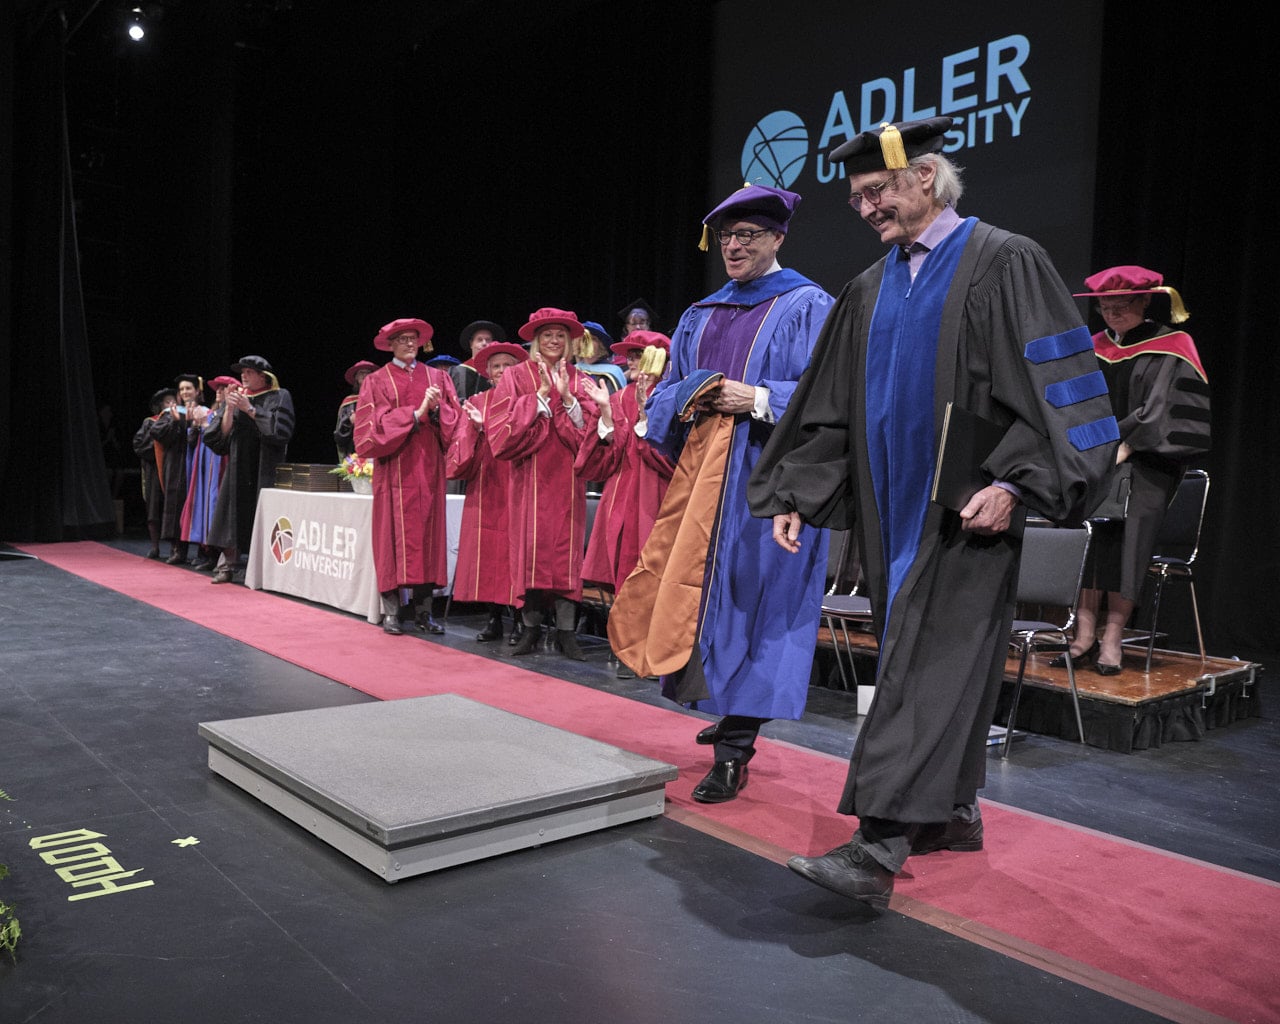 Two men walk of stage at a university commencement ceremony